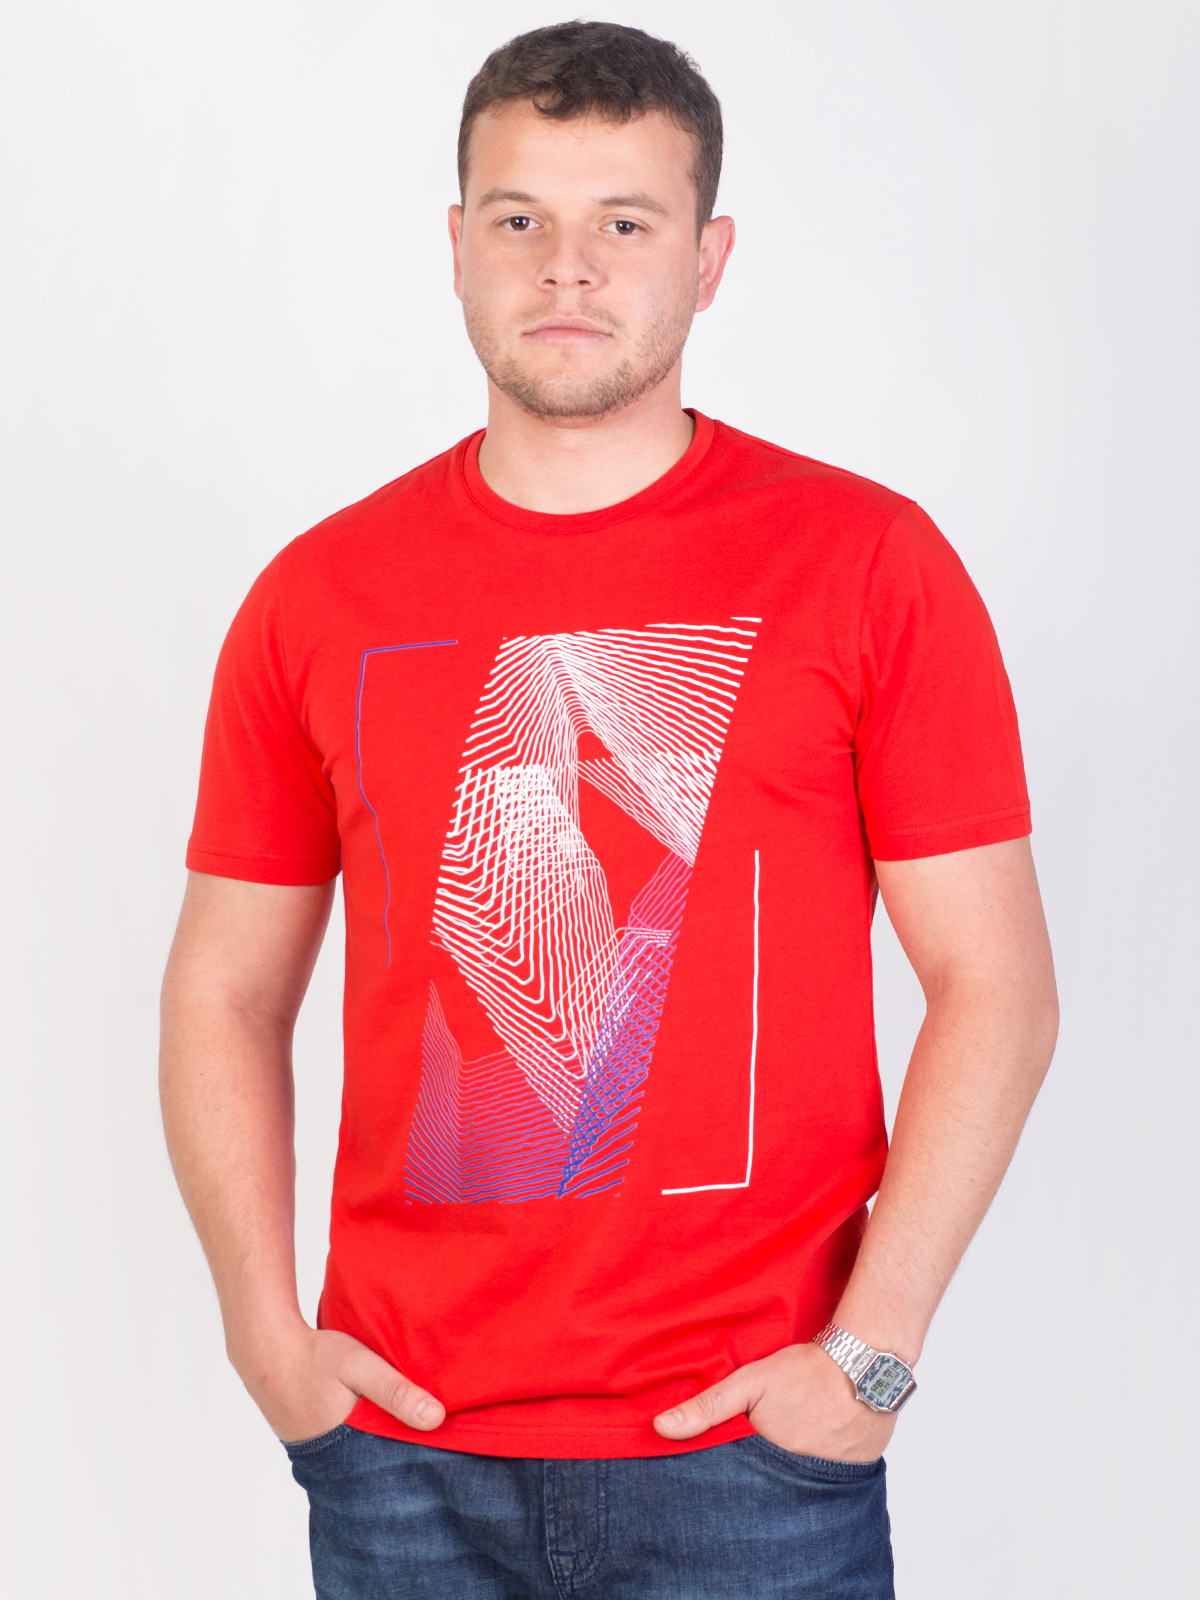 Tshirt in red with wave print - 96439 € 16.31 img3